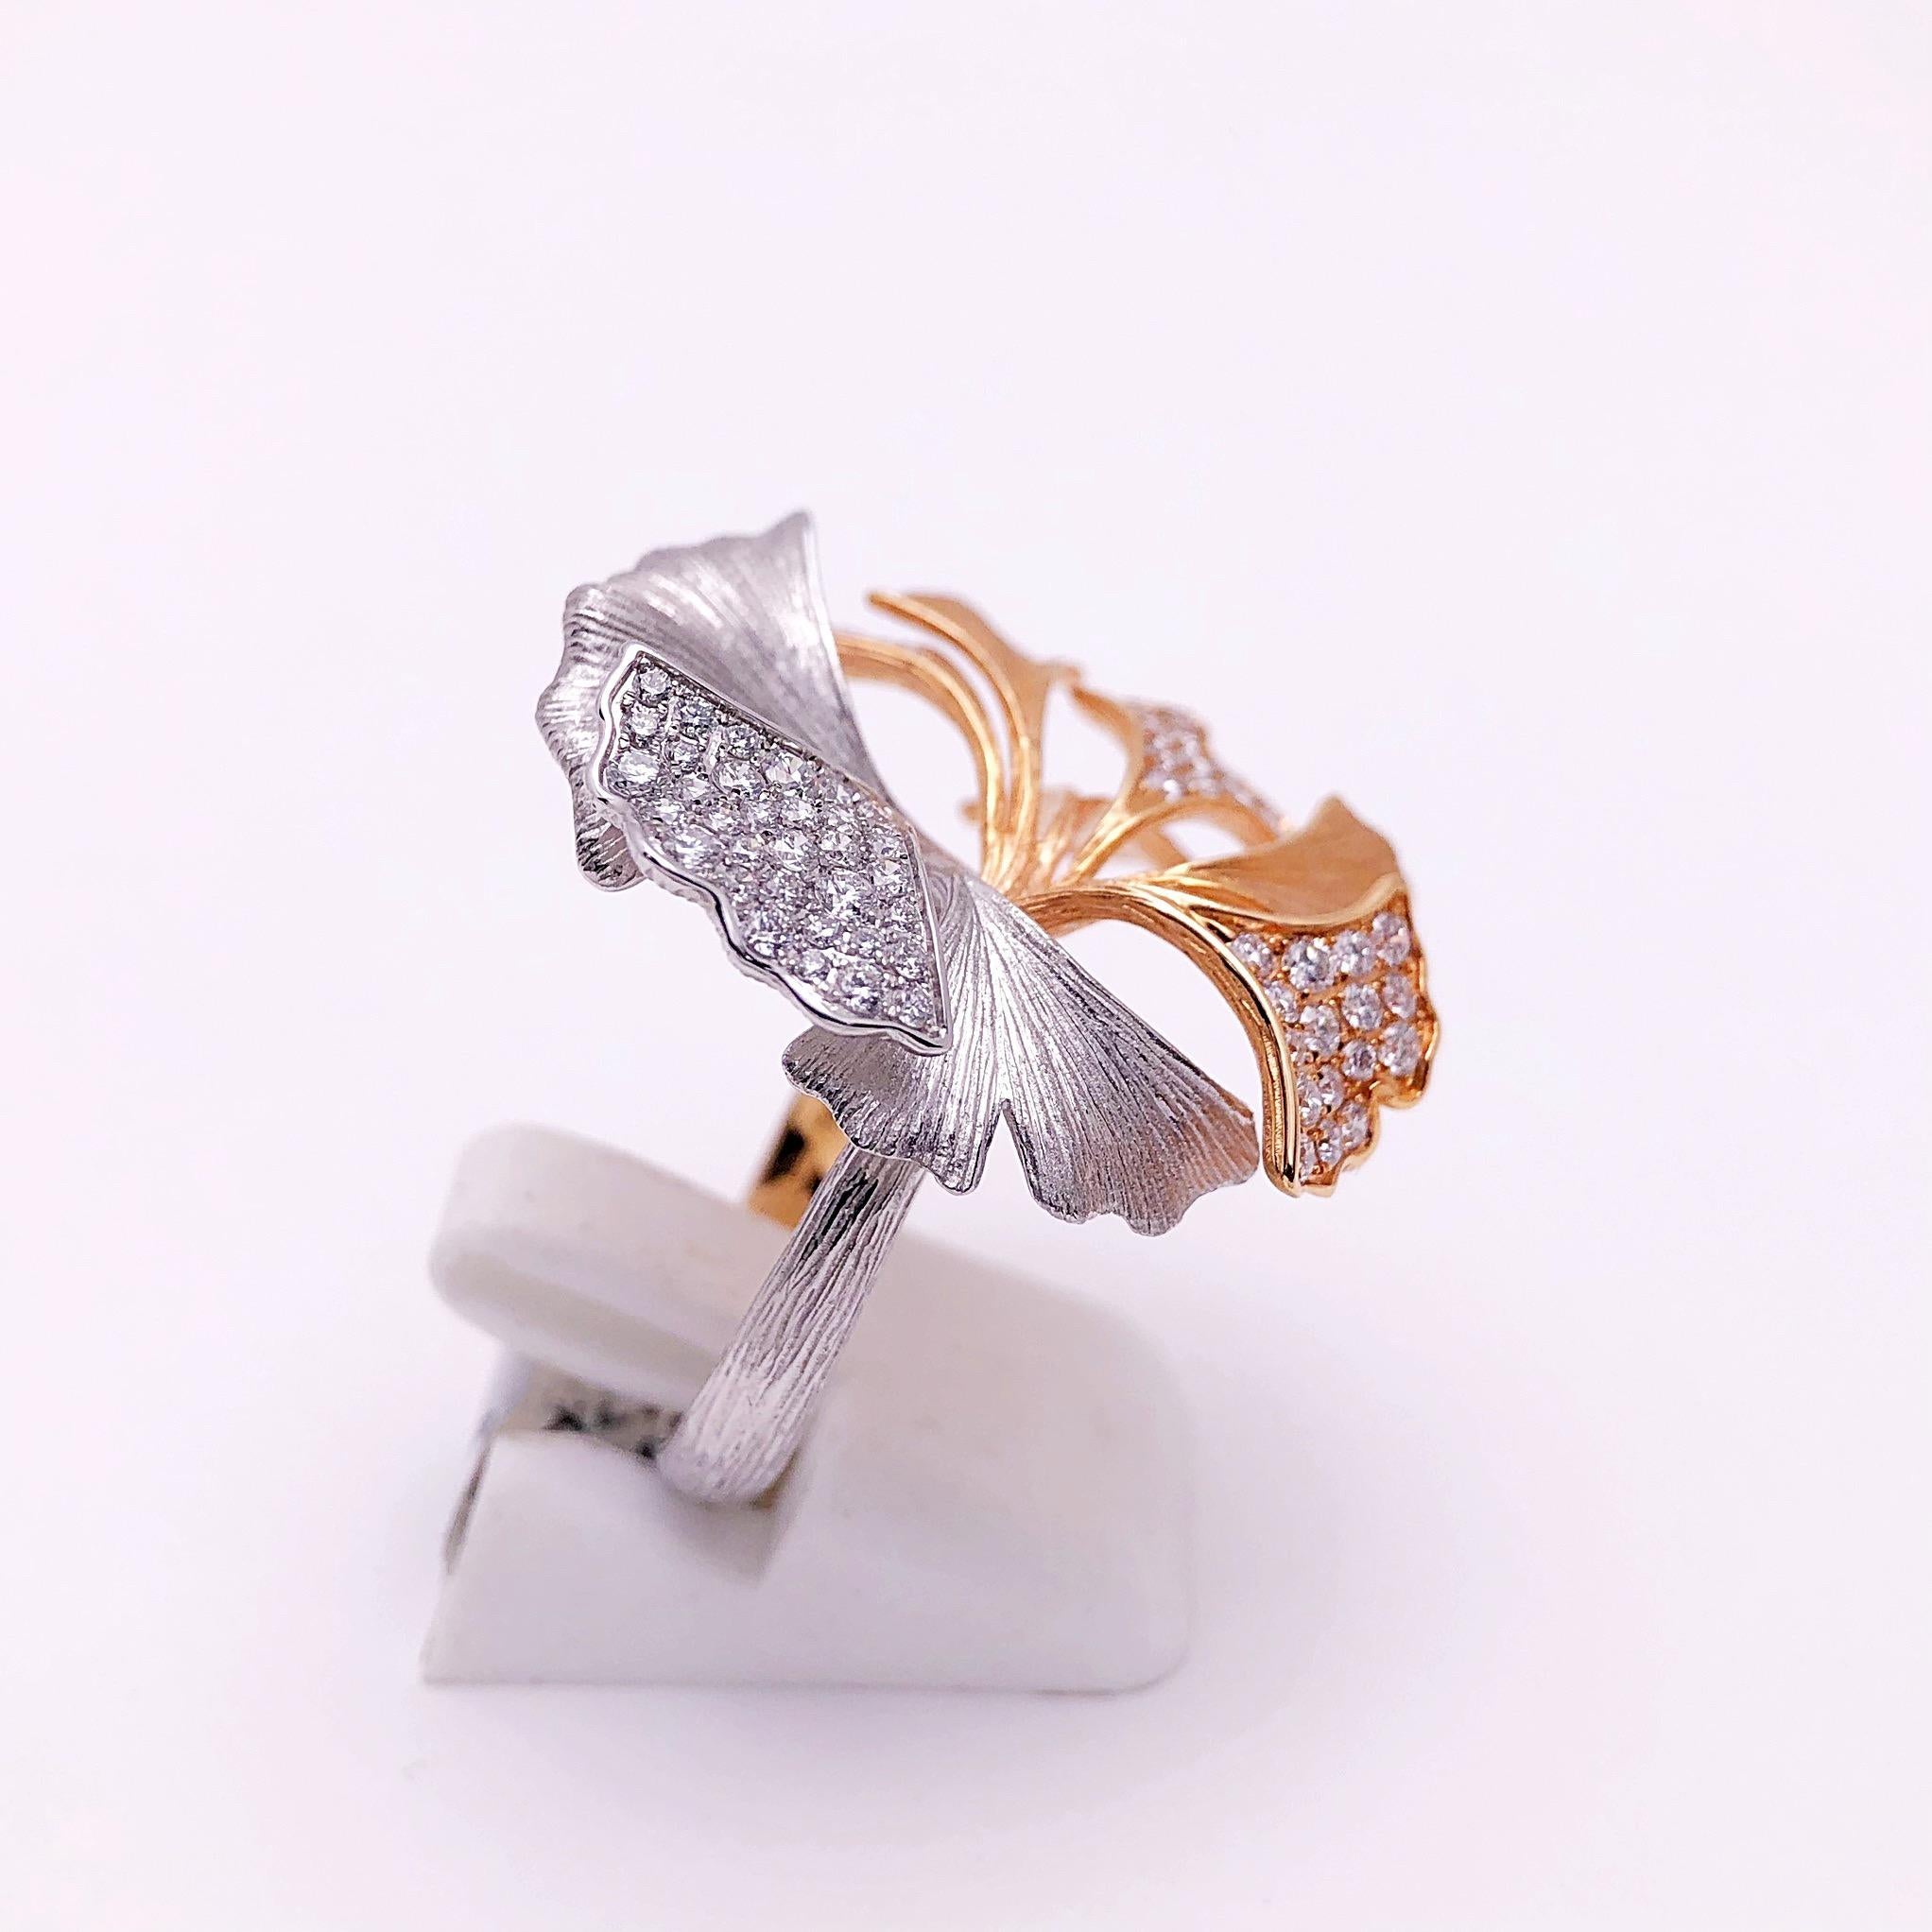 This beautiful Ginko Leaf ring is designed with 9 petals in a soft matte finish.  Four of the petals are set with 75  round brilliant diamonds. The leaves are detailed with veining. The combination of the rose and white gold with diamonds makes this